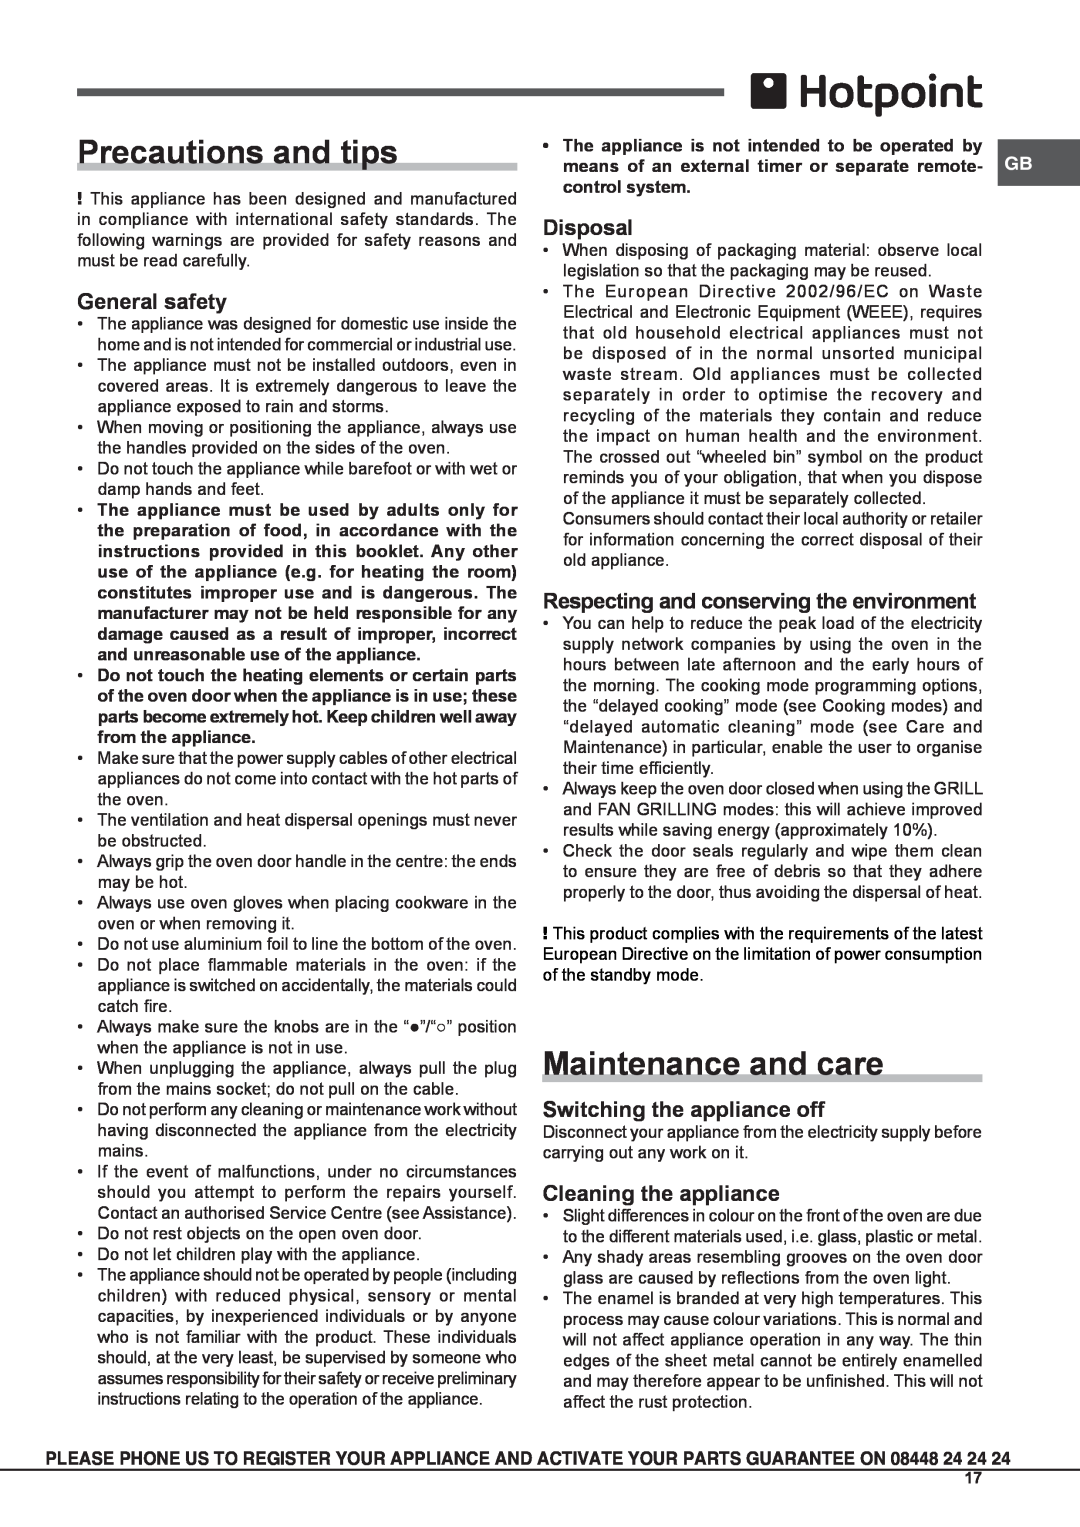 Hotpoint OSHS89EDC manual Precautions and tips, Maintenance and care, General safety, Disposal, Switching the appliance off 